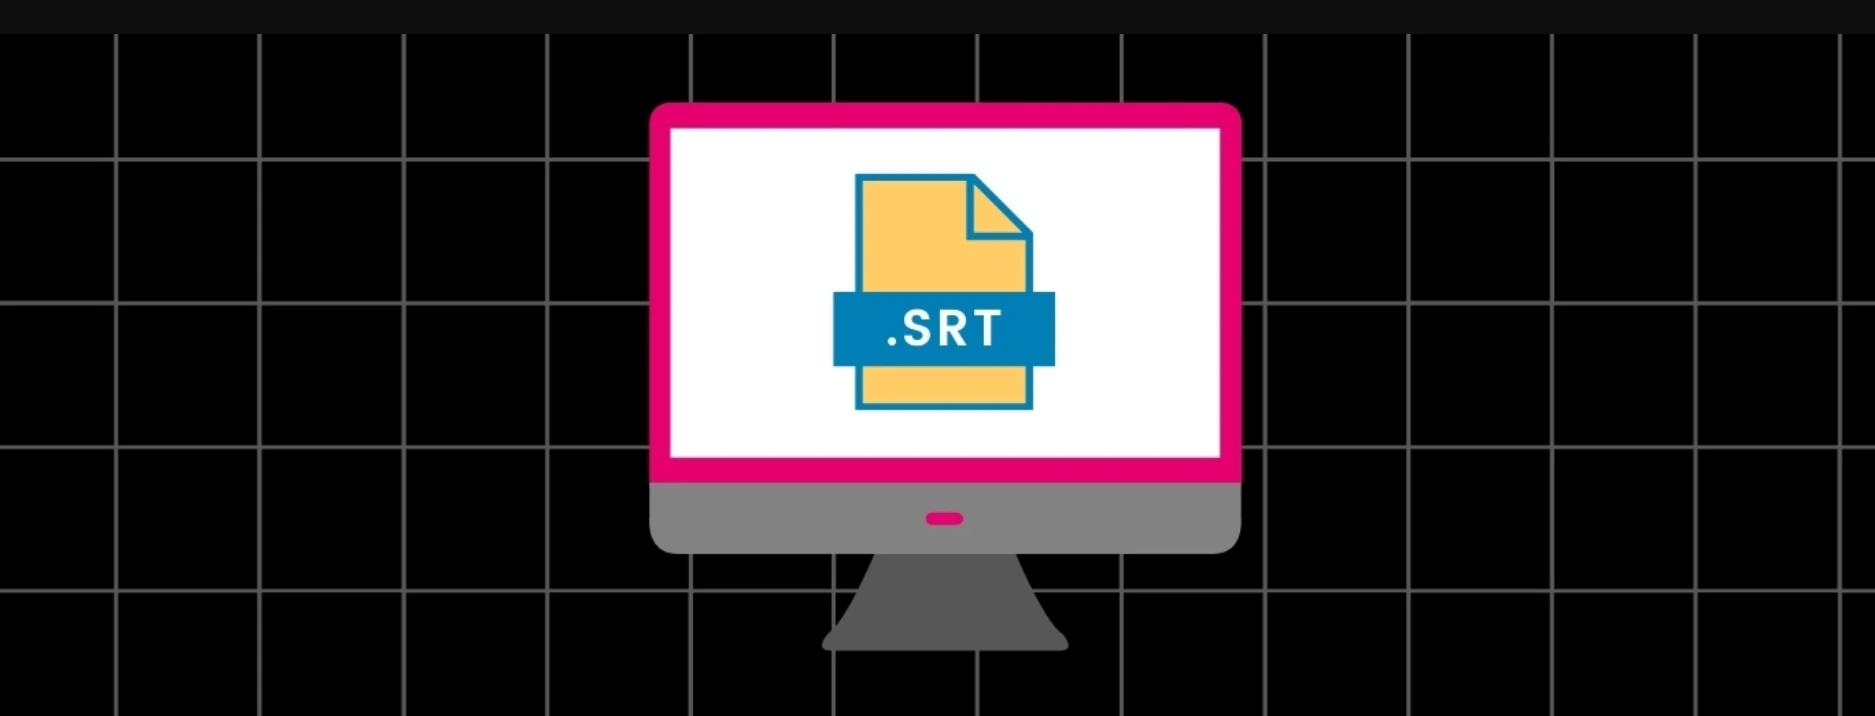 what are .srt files?